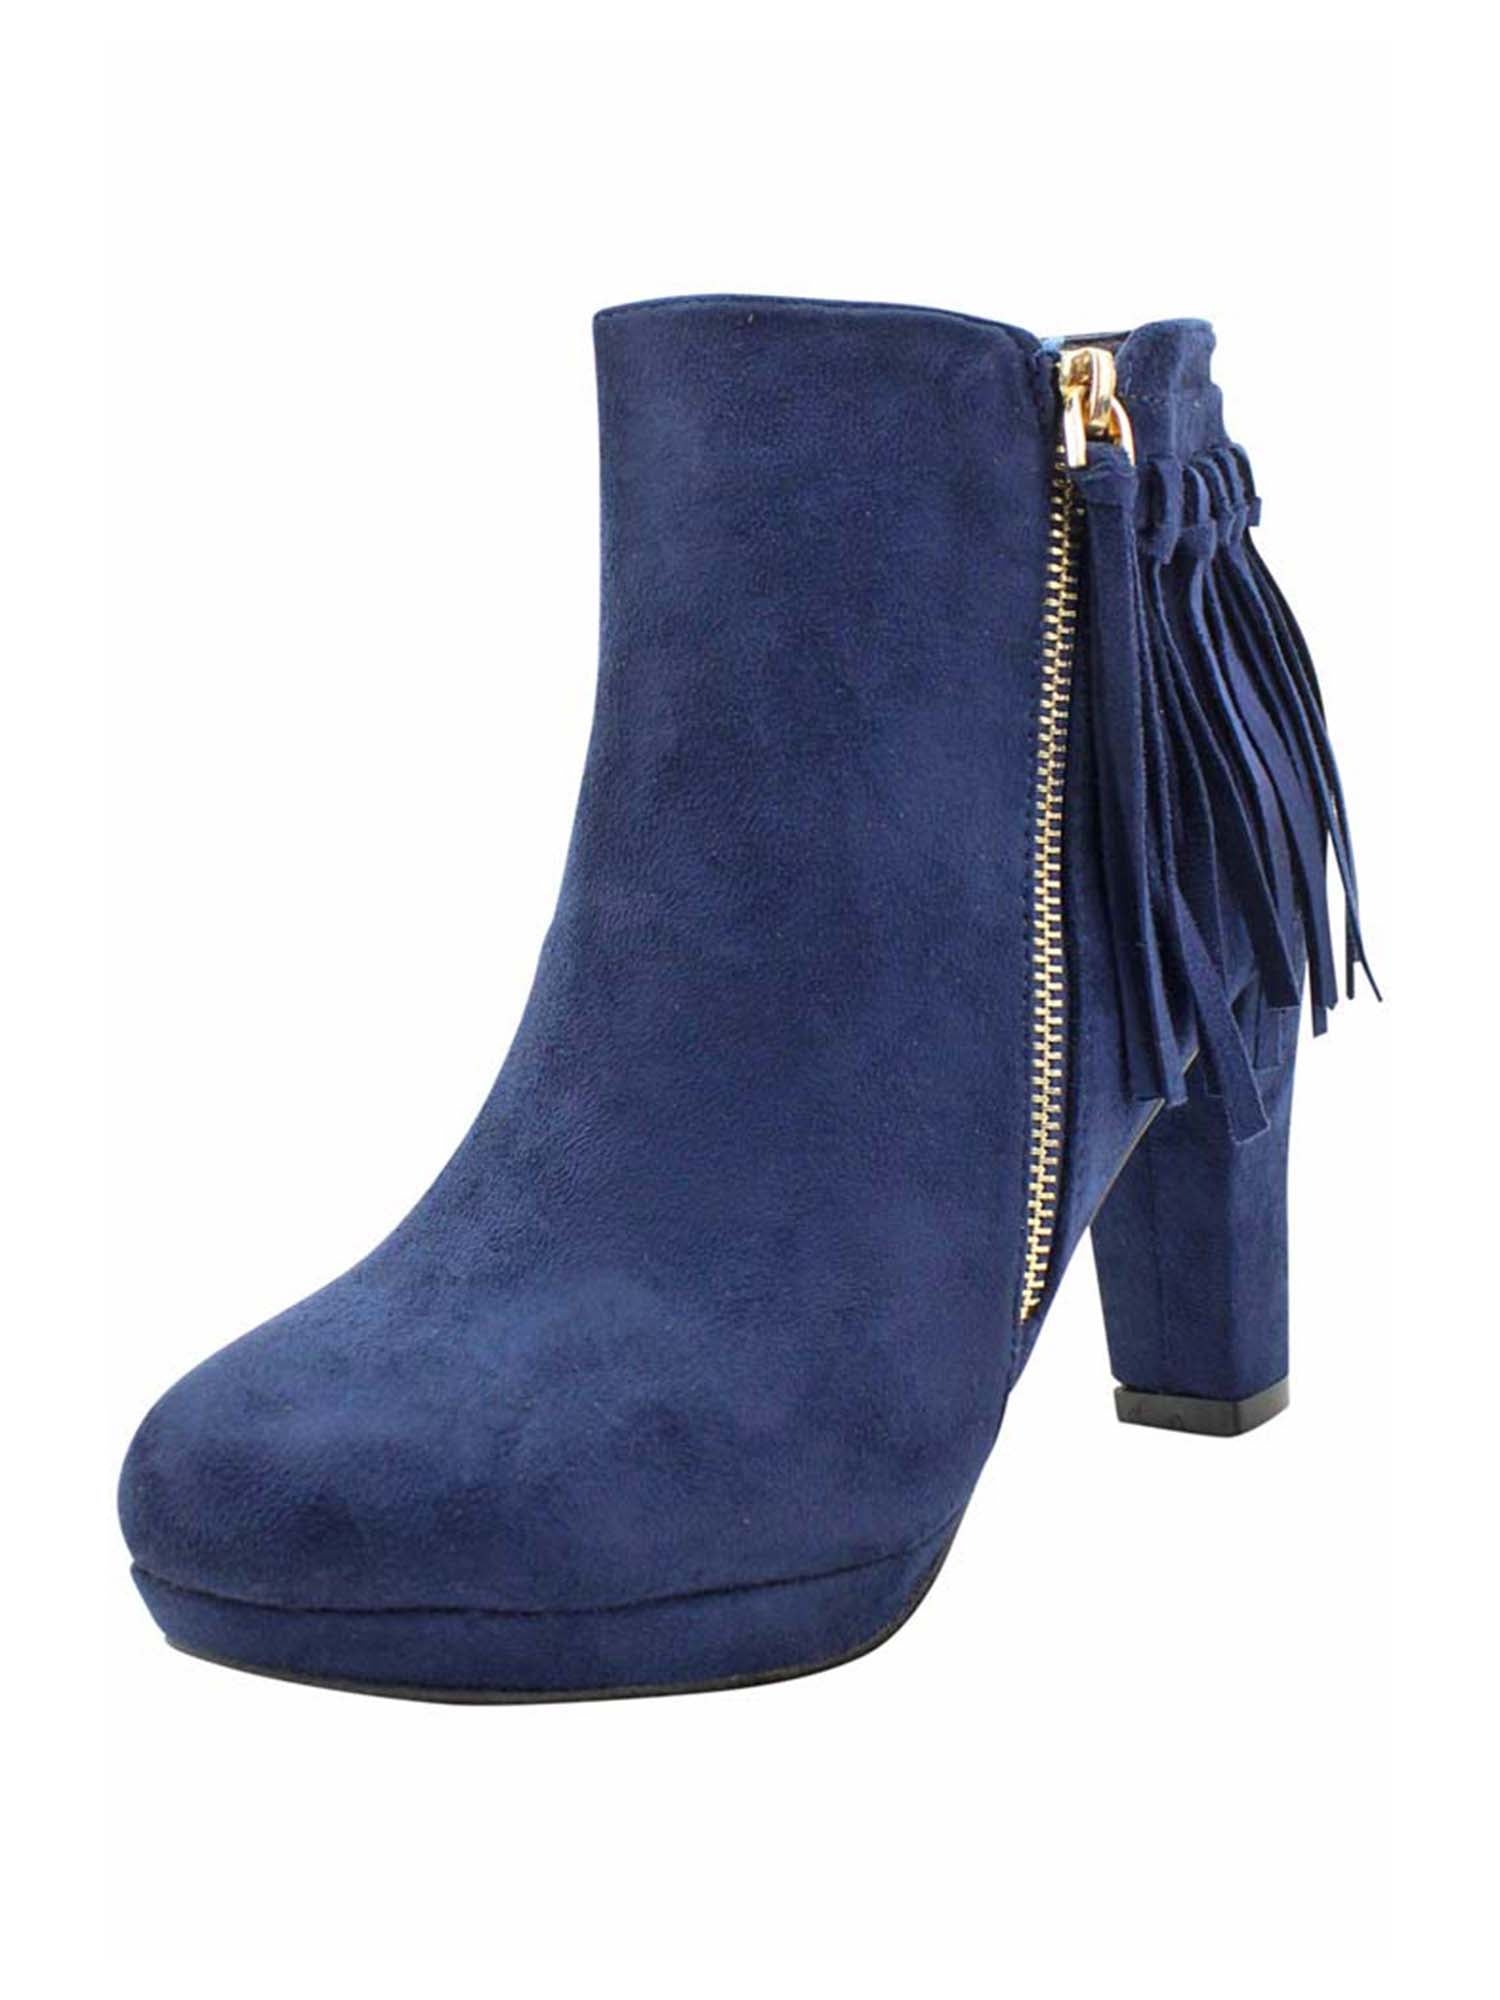 Gianvito Rossi Navy Blue Suede Lace Up Ankle Booties 39 – TBC Consignment